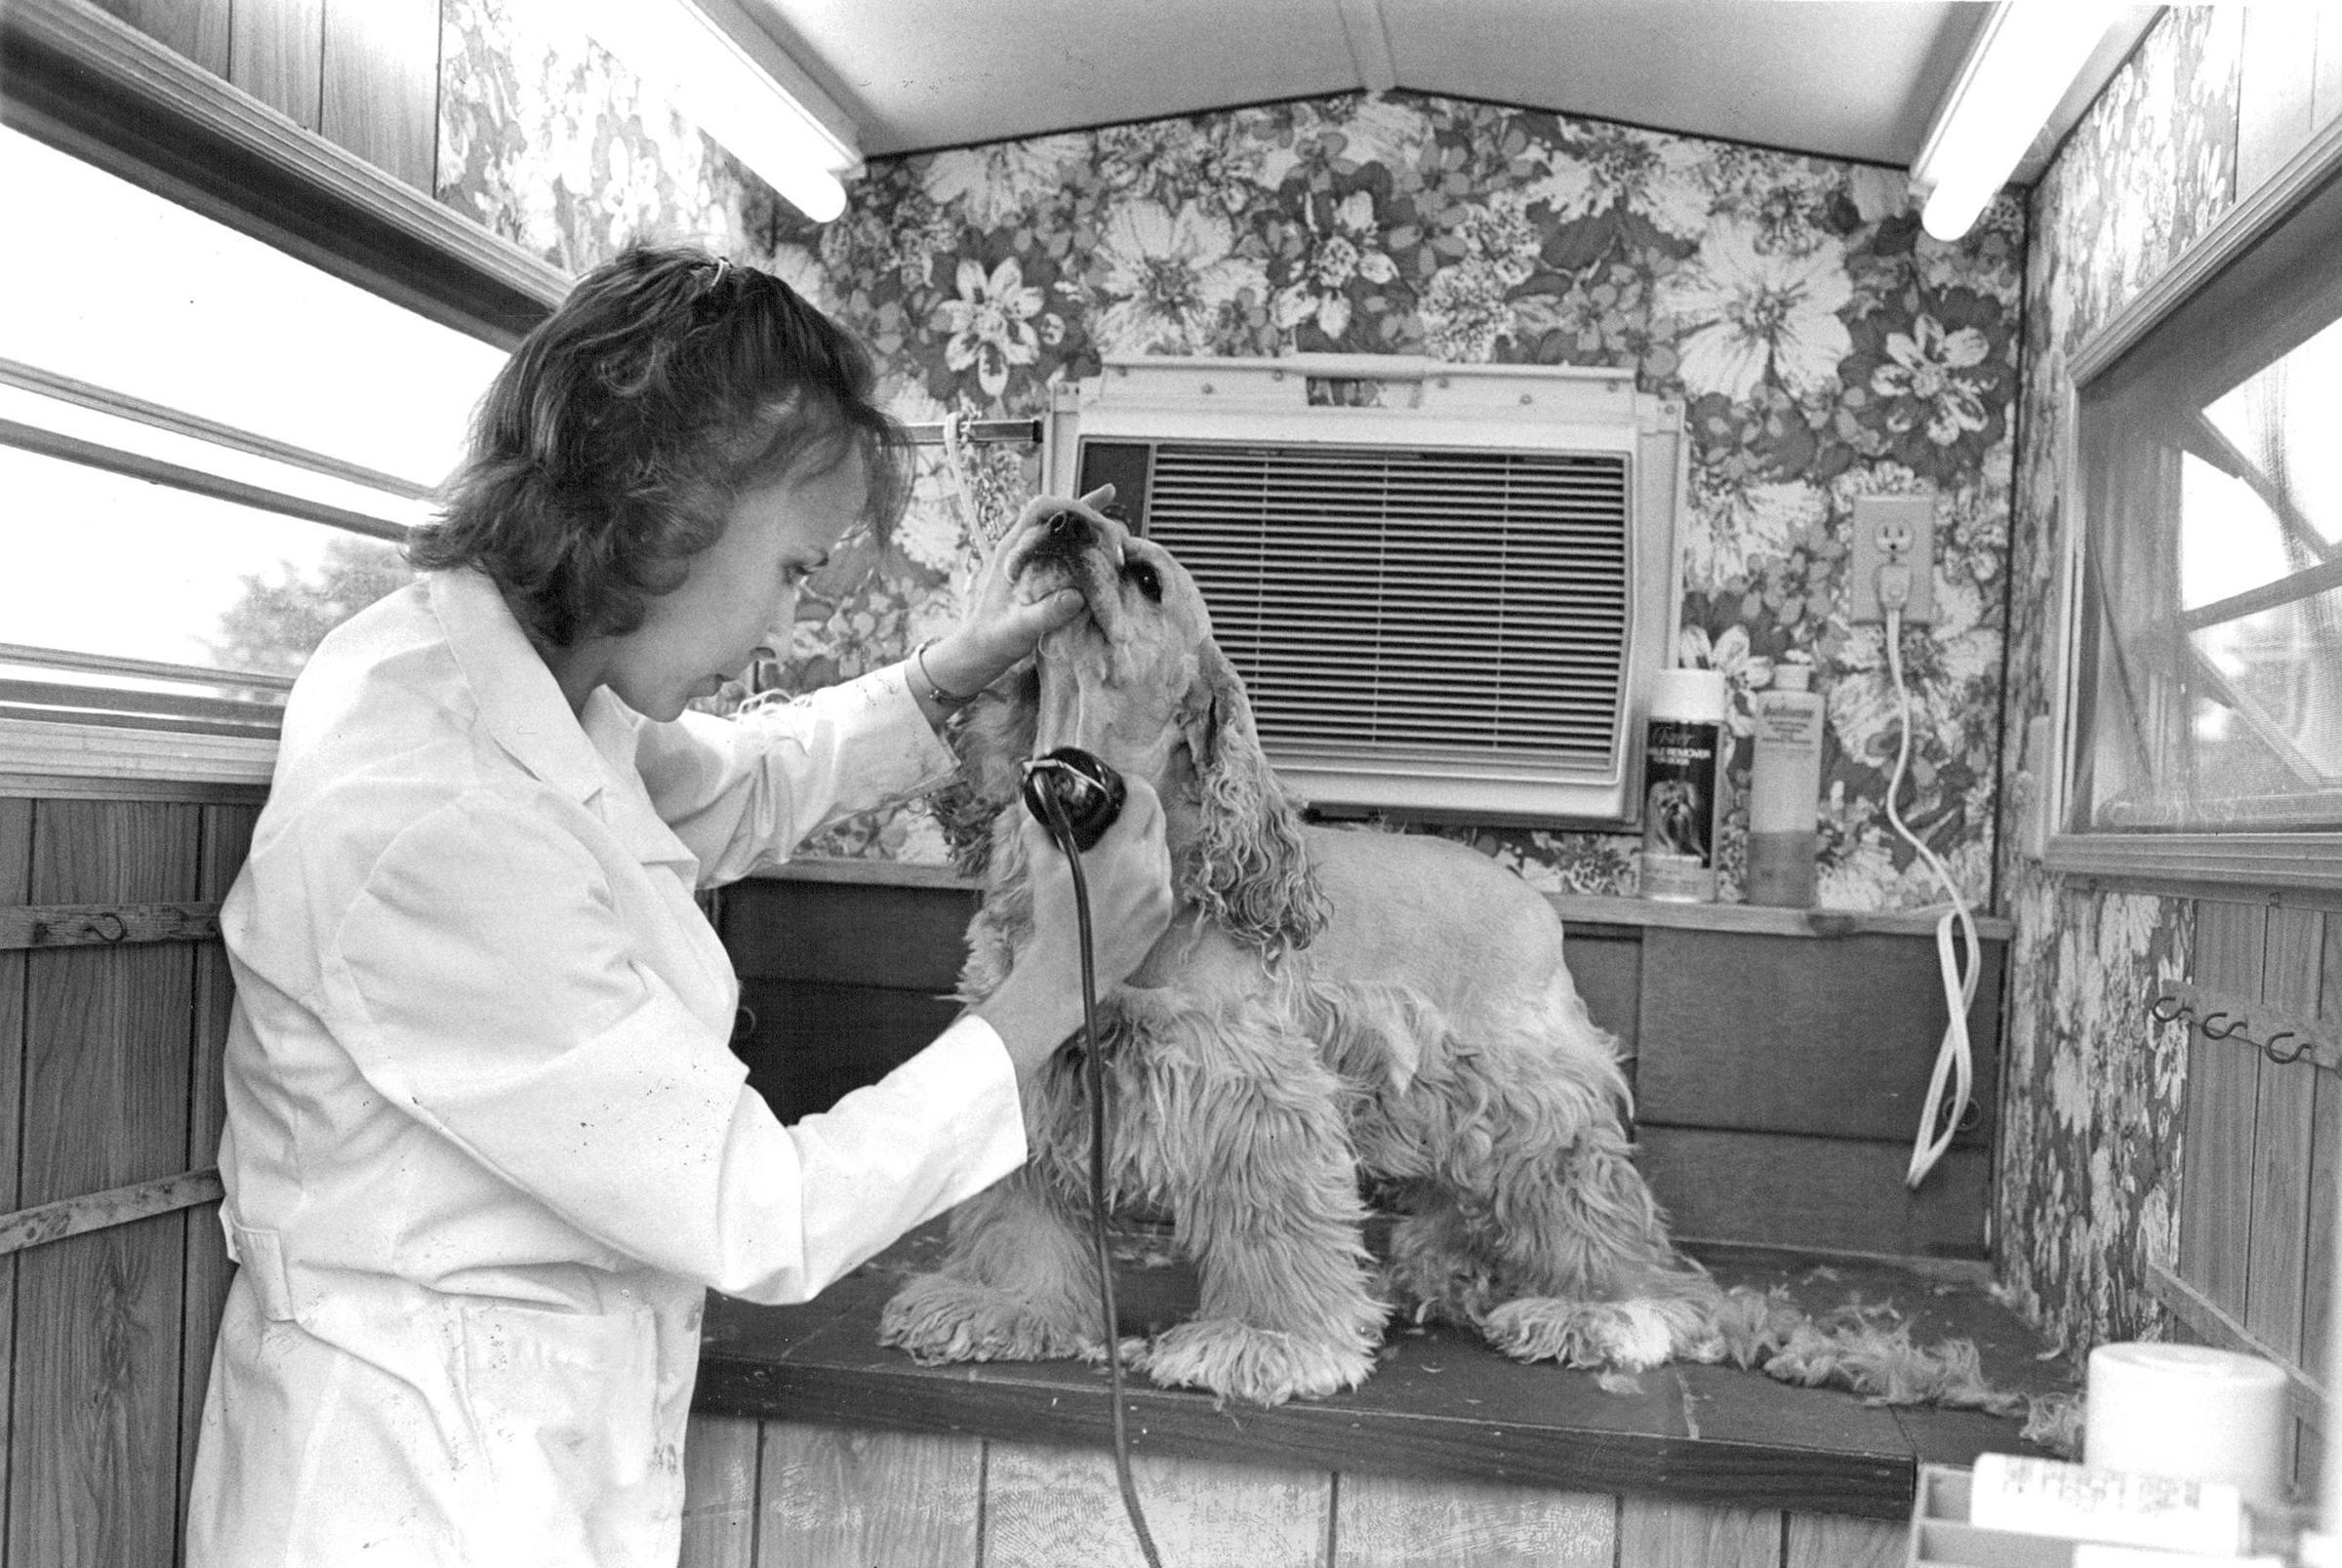 Angela Eaton grooms "Dutchess" inside "House Calls" trailer in 1982. The unit is equipped with a bath, heater, air conditioner and dryer.